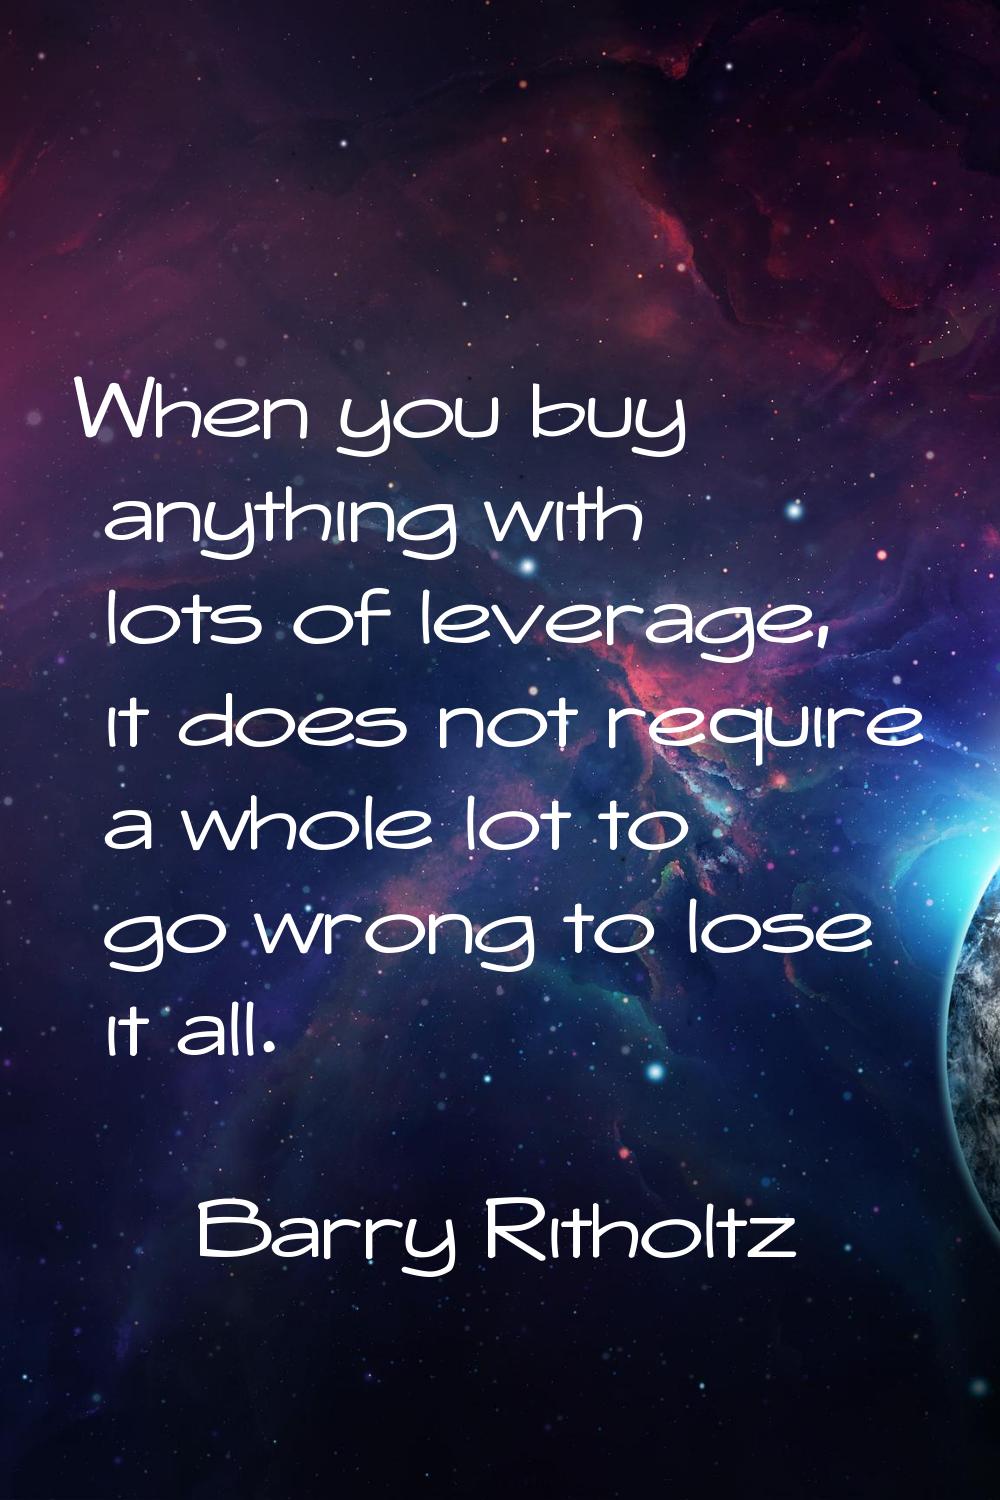 When you buy anything with lots of leverage, it does not require a whole lot to go wrong to lose it